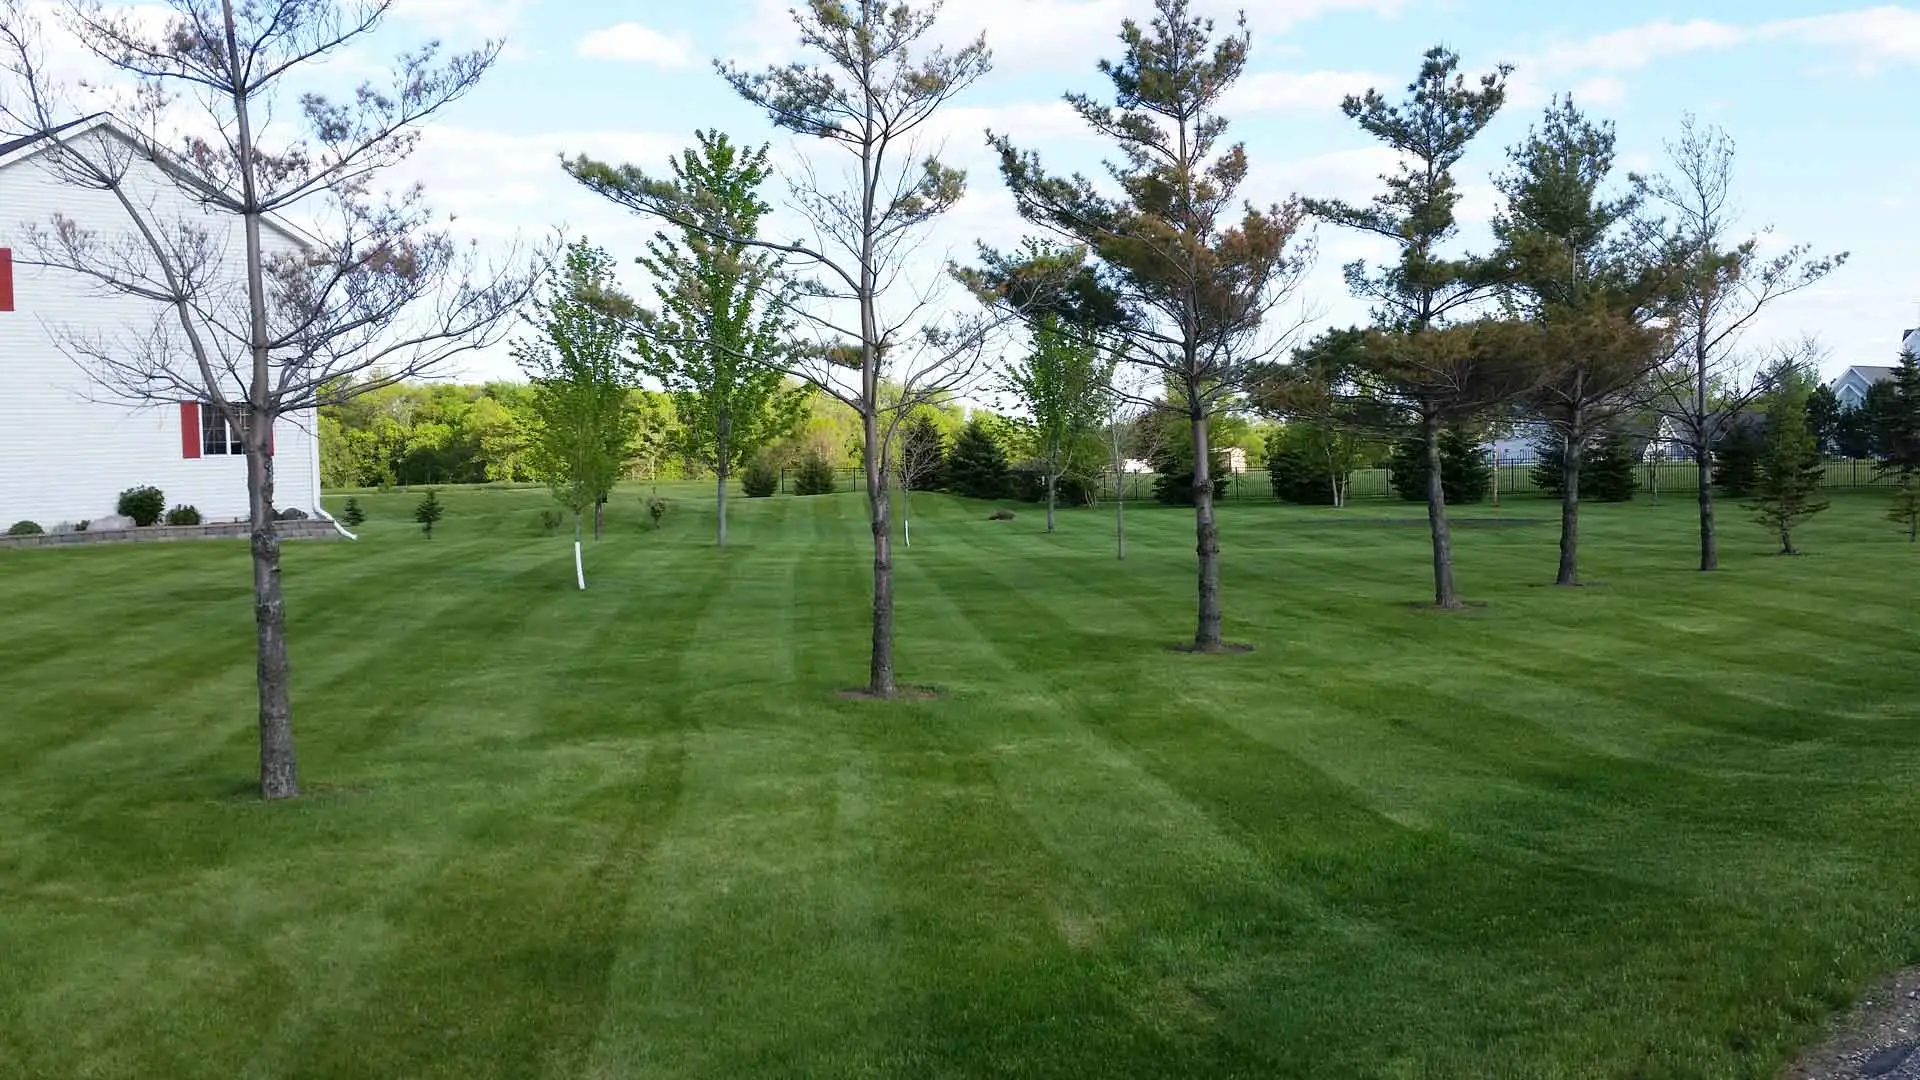 Residential property in St. Cloud with our lawn care services.